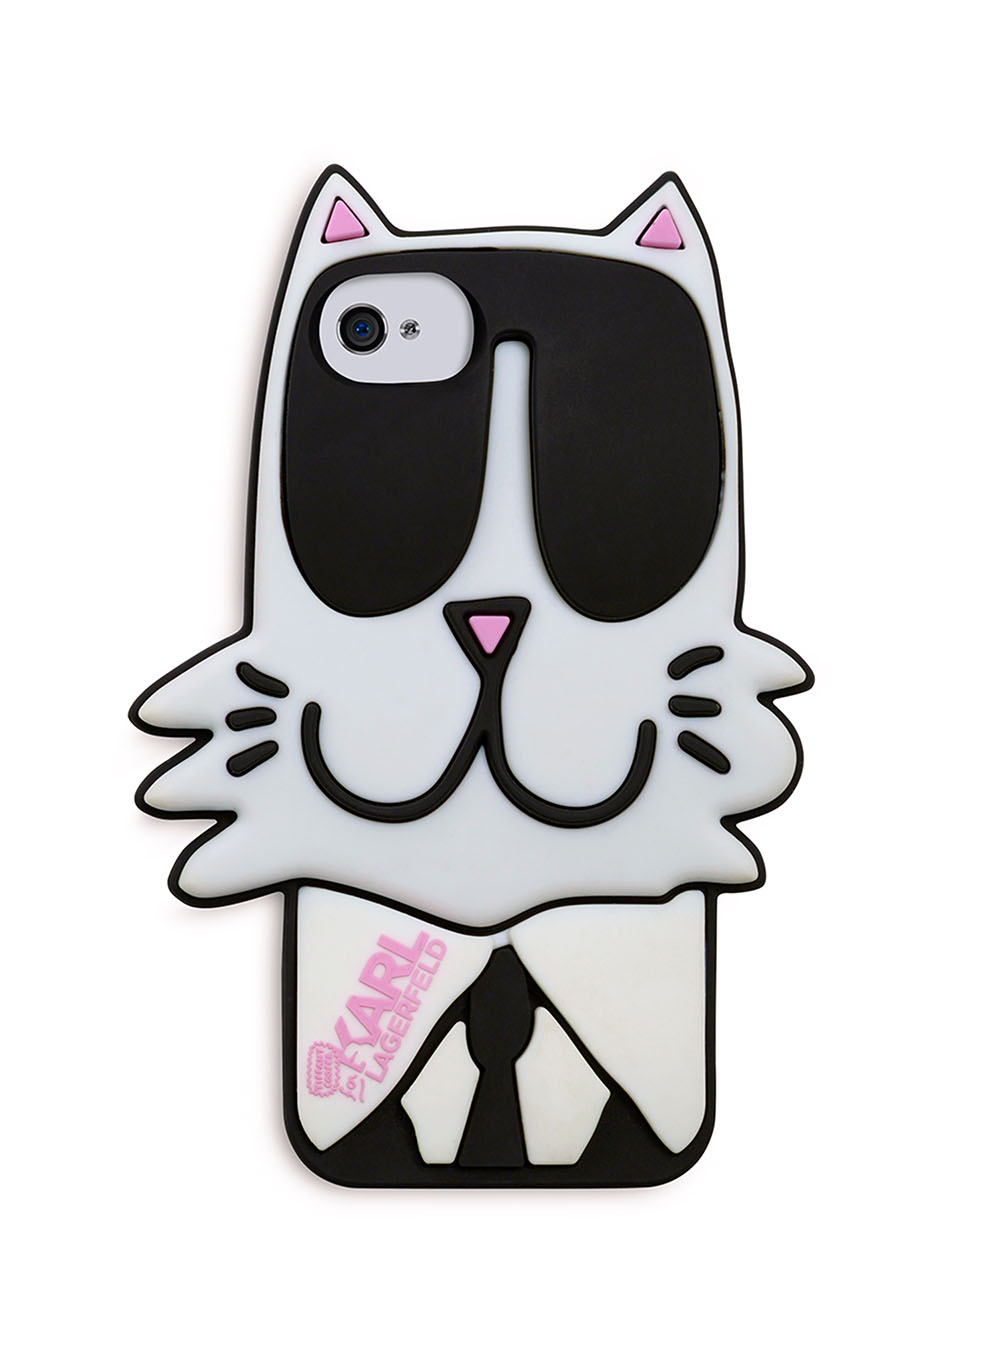 KARL LAGERFELD x Tiffany Cooper Capsule Collection 4